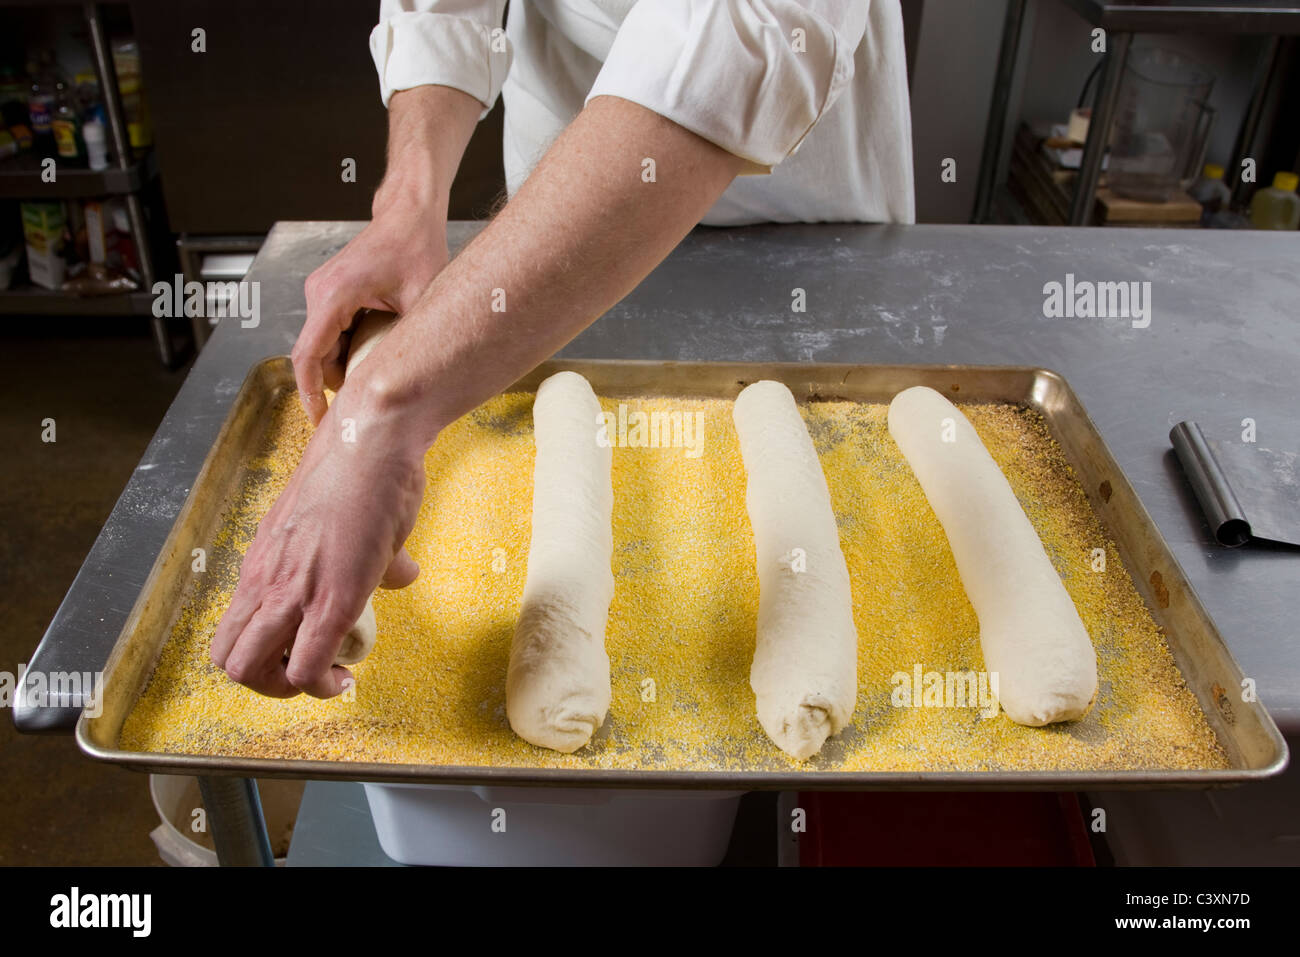 Professional cook preparing fresh bread in a commercial bakery Stock Photo